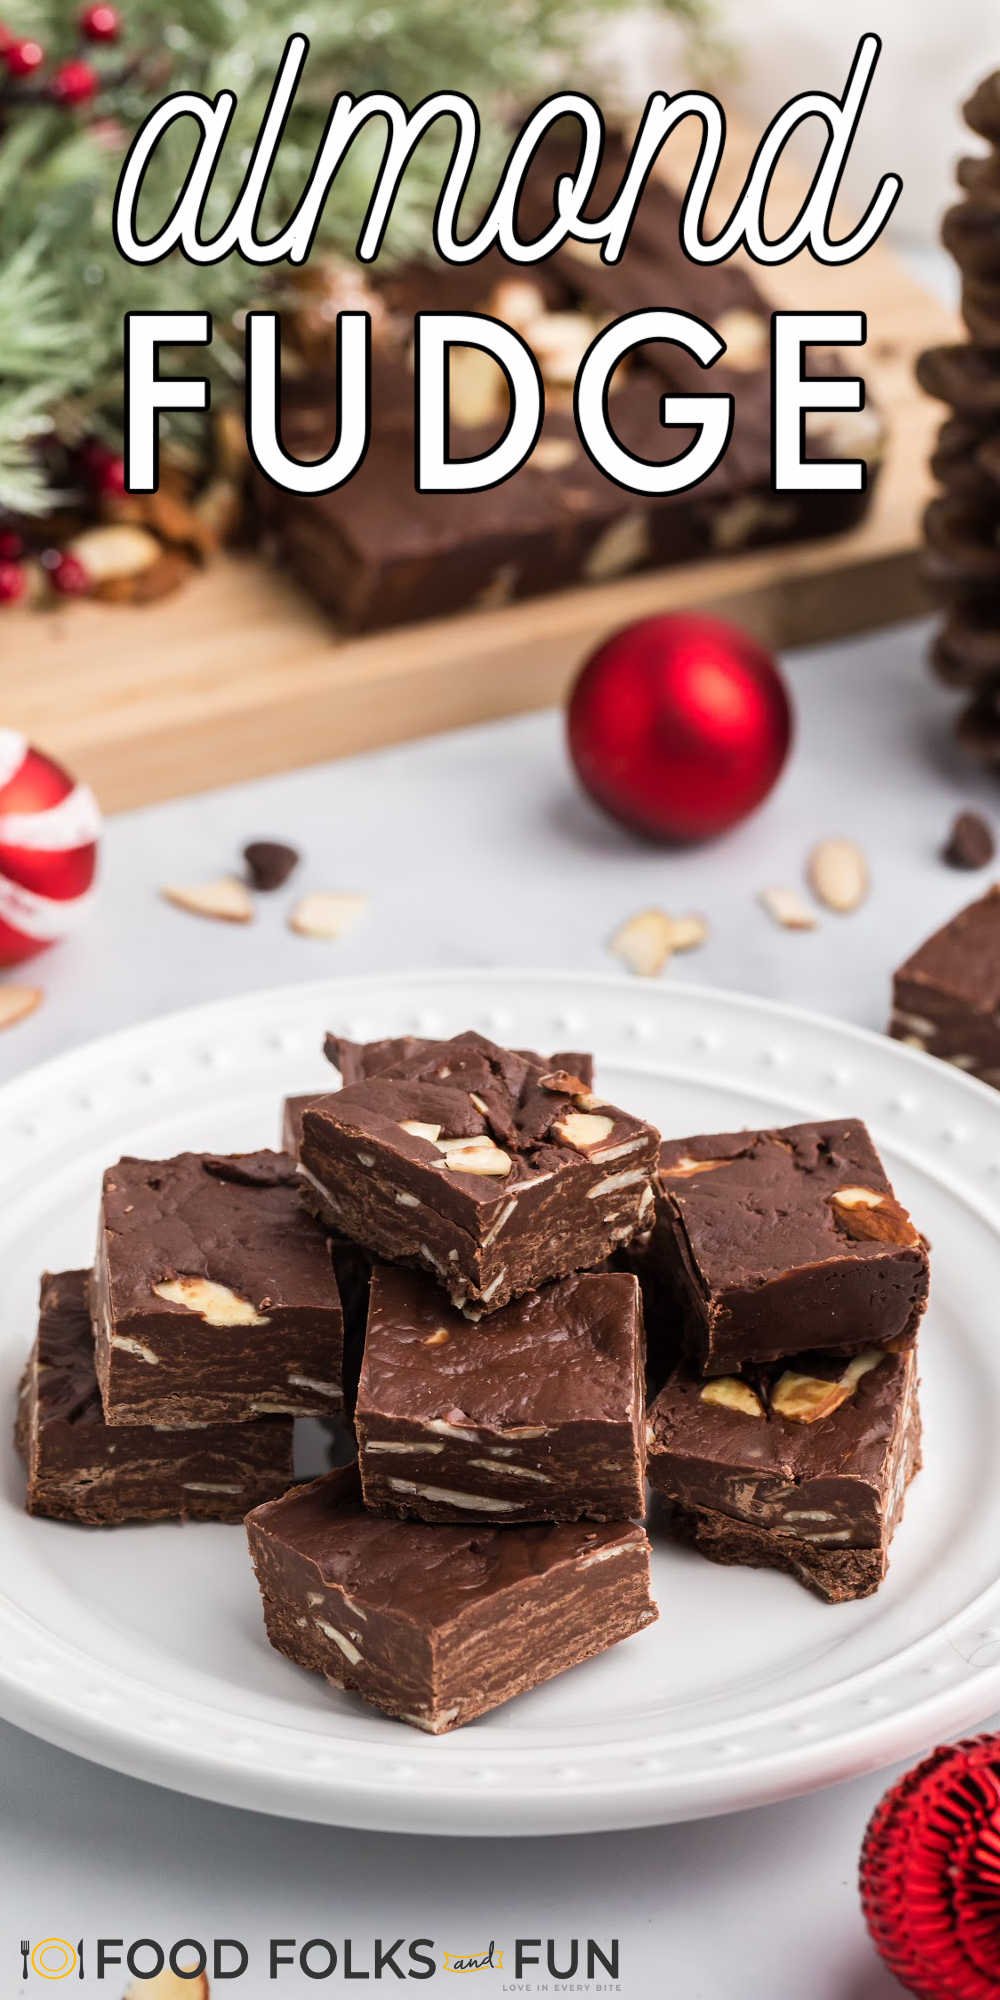 This Easy Chocolate Fudge recipe is studded with almonds and simple to make. All you need are just four ingredients to make this easy fudge!  via @foodfolksandfun